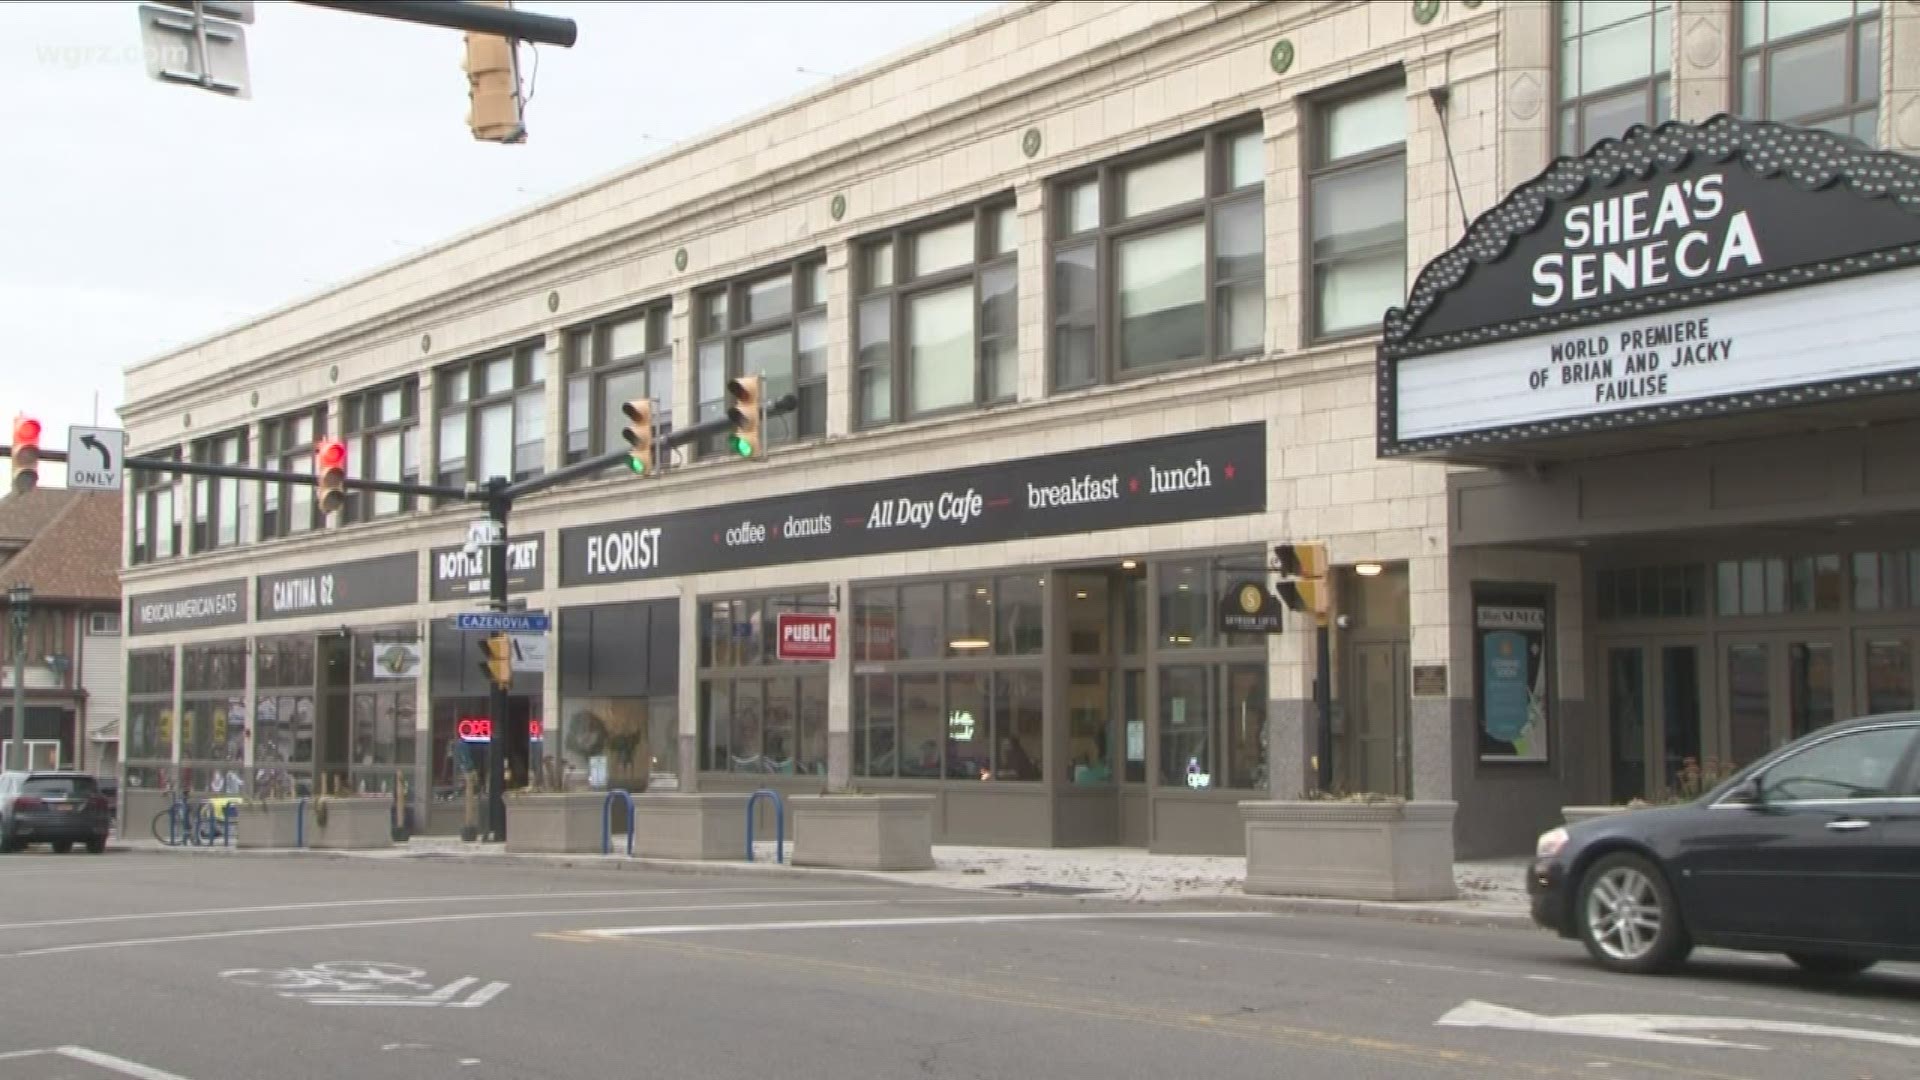 South Buffalo usually isn't the first place on peoples' minds, but that seems to be changing'  all thanks to the makeover that Seneca street is getting.